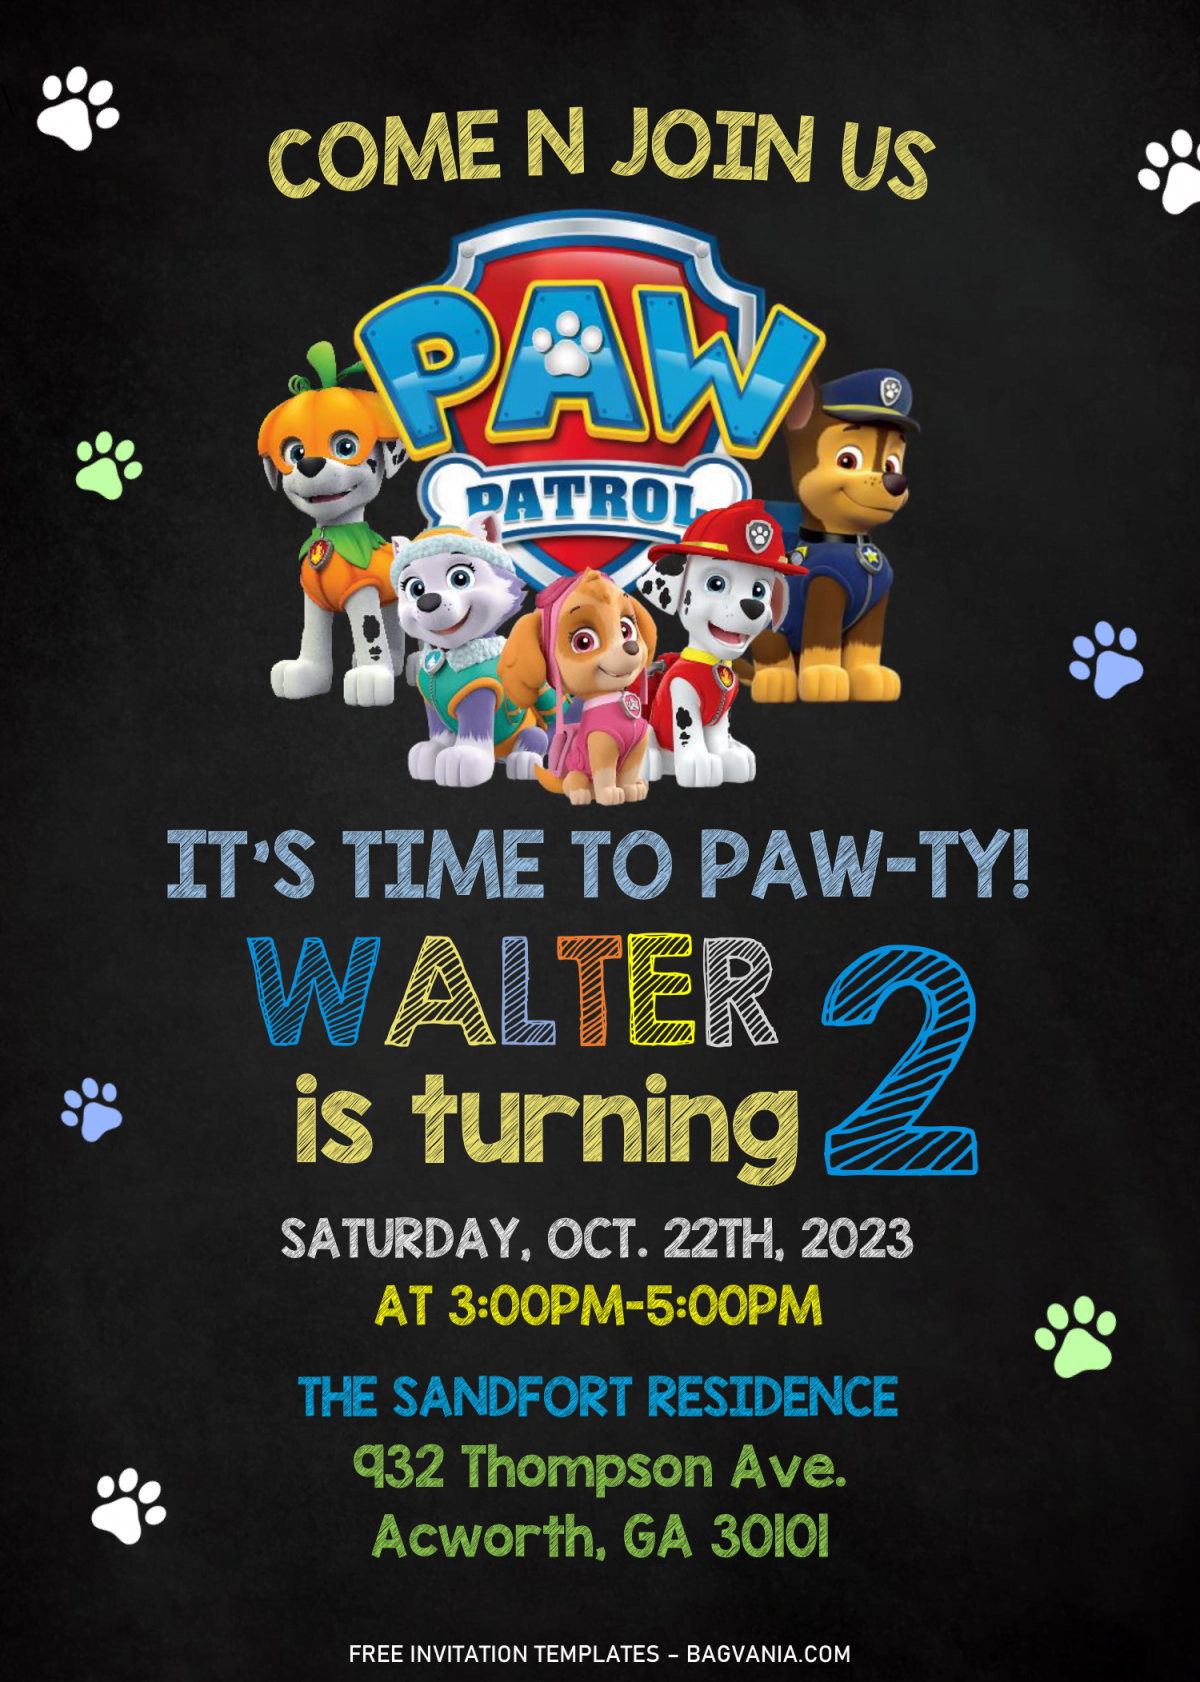 PAW Patrol Invitation Templates - Editable With Microsoft Word and has colorful paw prints